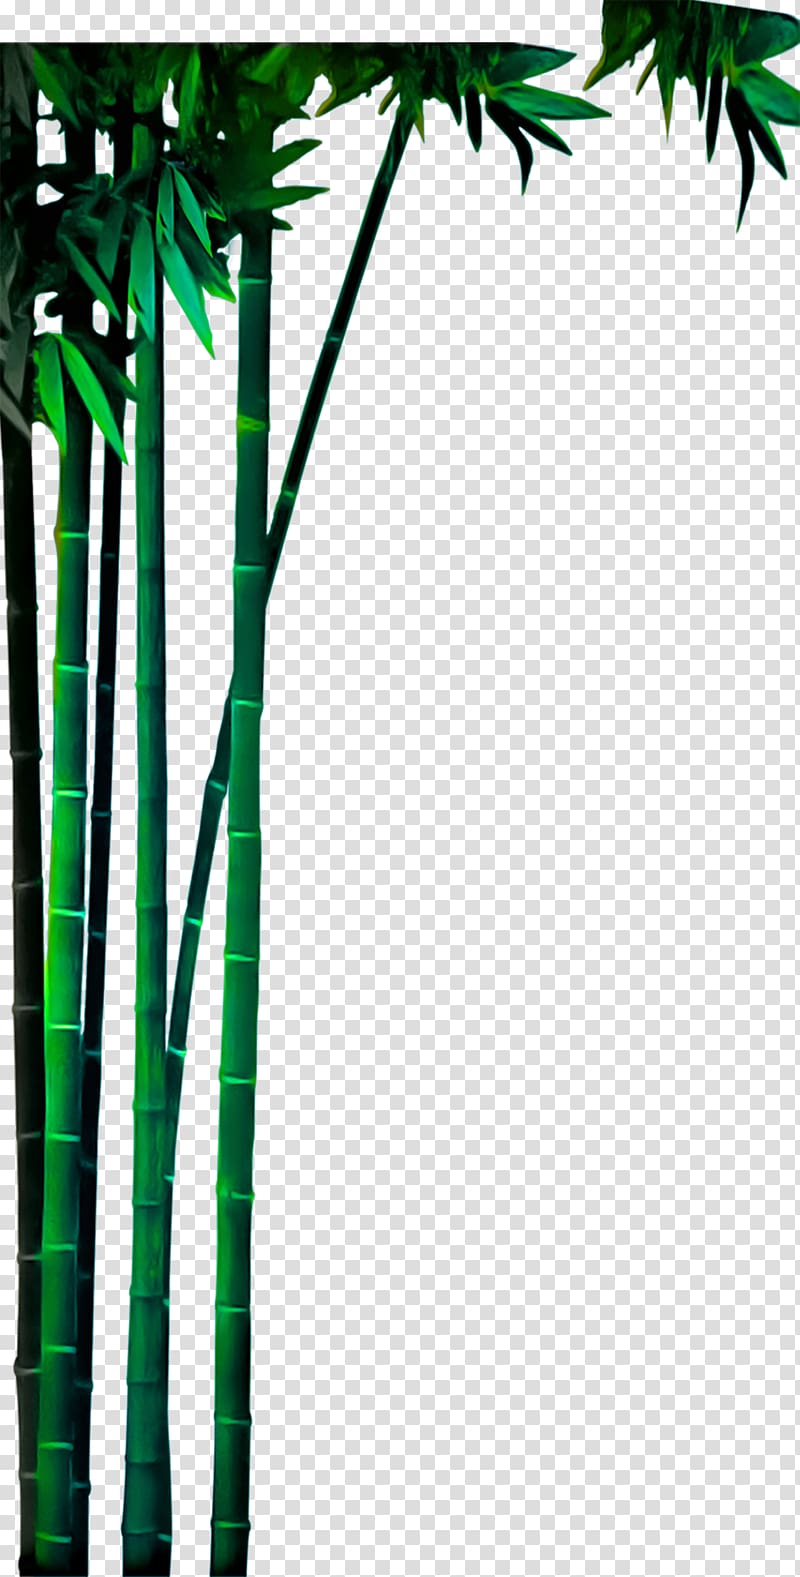 Bamboo Bamboe Green, Real green bamboo material transparent background PNG clipart